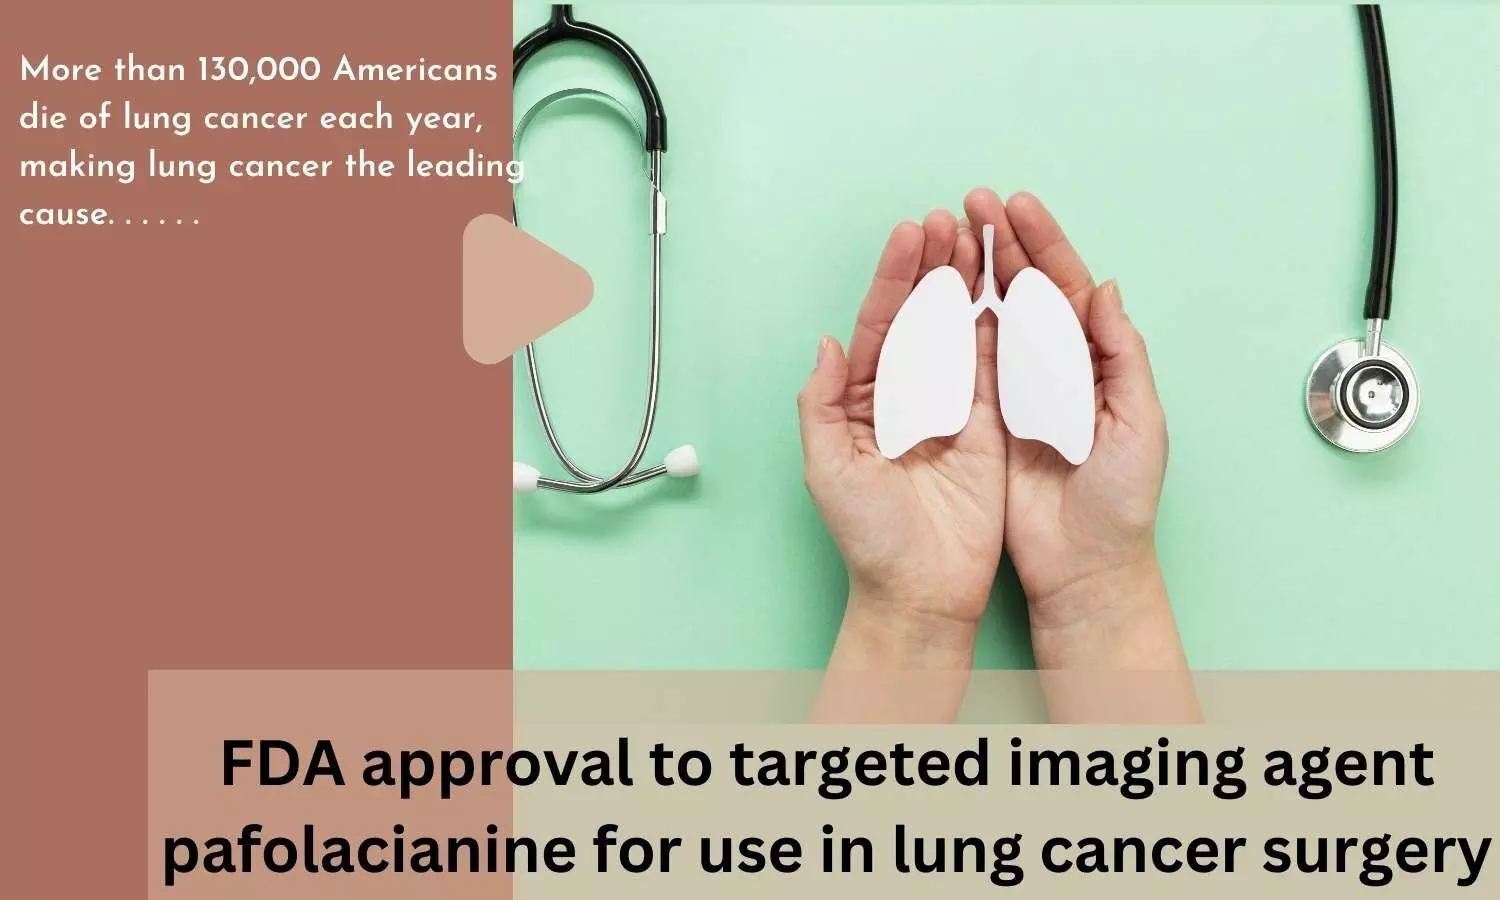 FDA approval to targeted imaging agent pafolacianine for use in lung cancer surgery